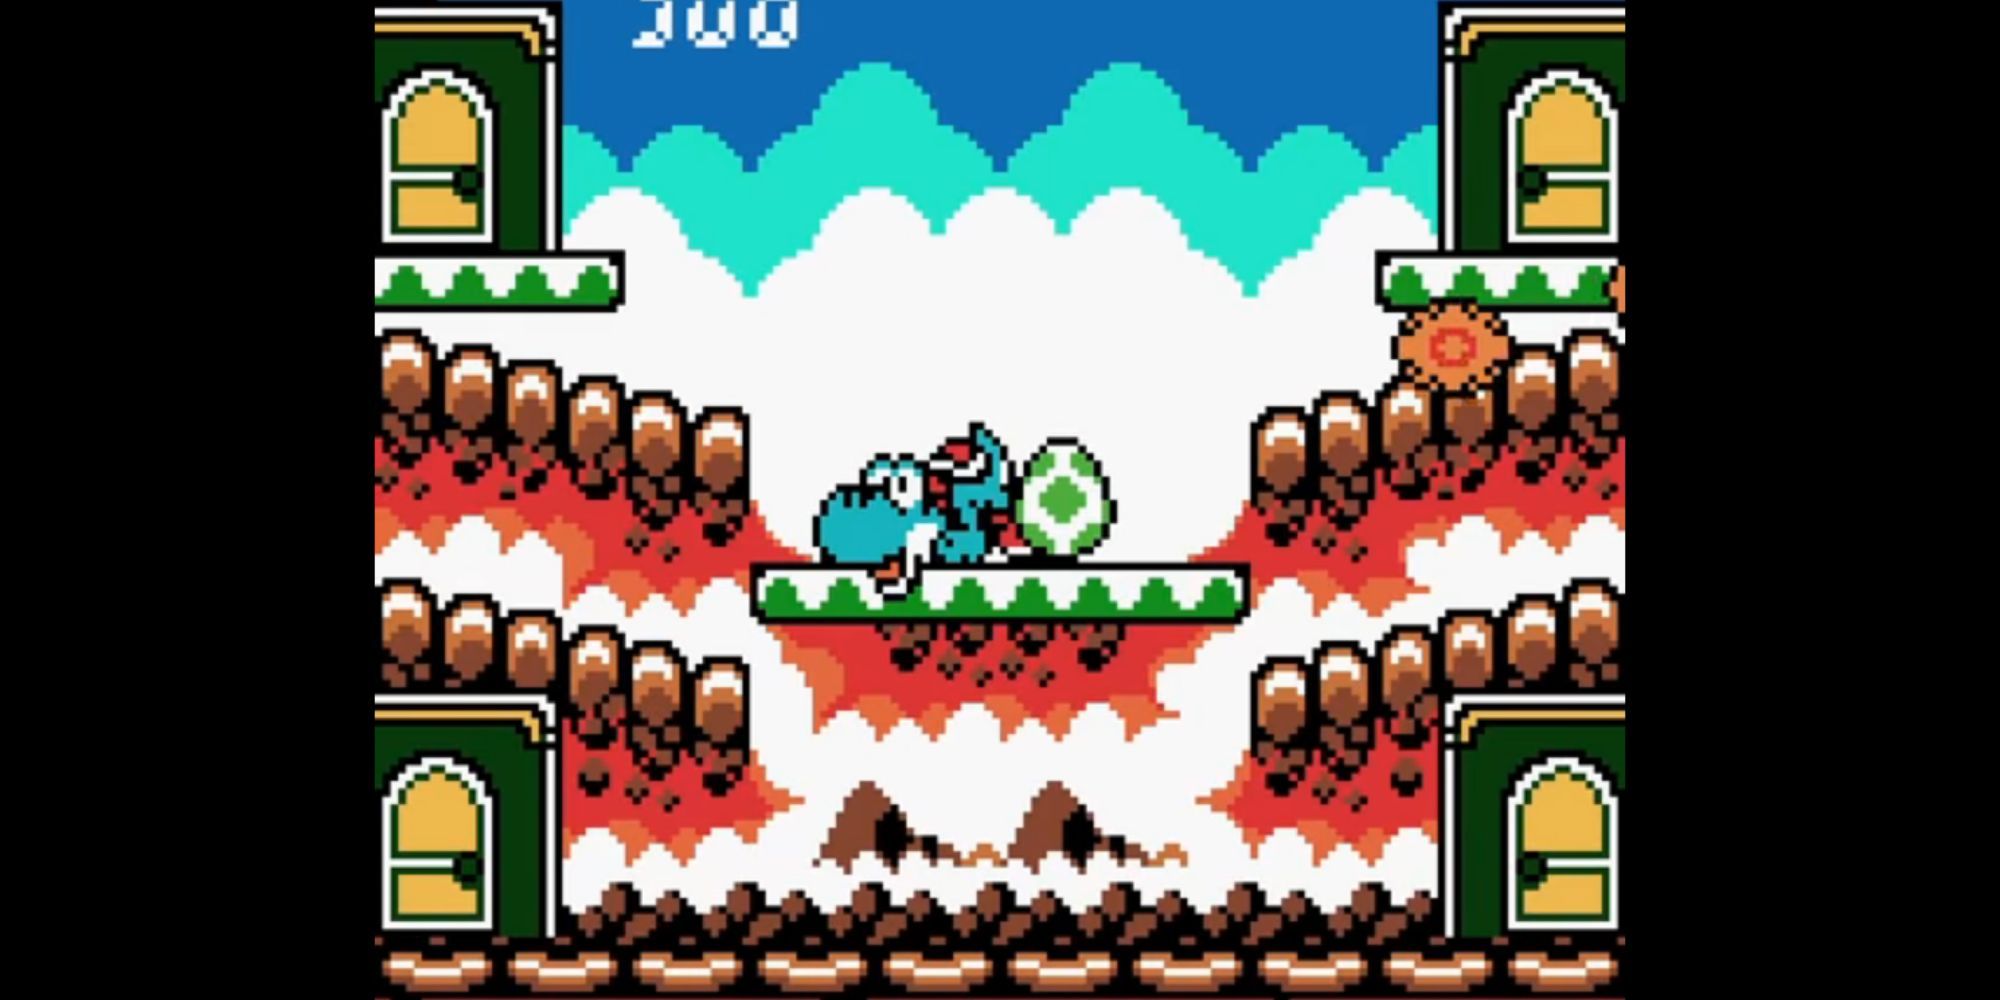 Yoshi lays on a platform with an egg behind it in Game and Watch Gallery 3